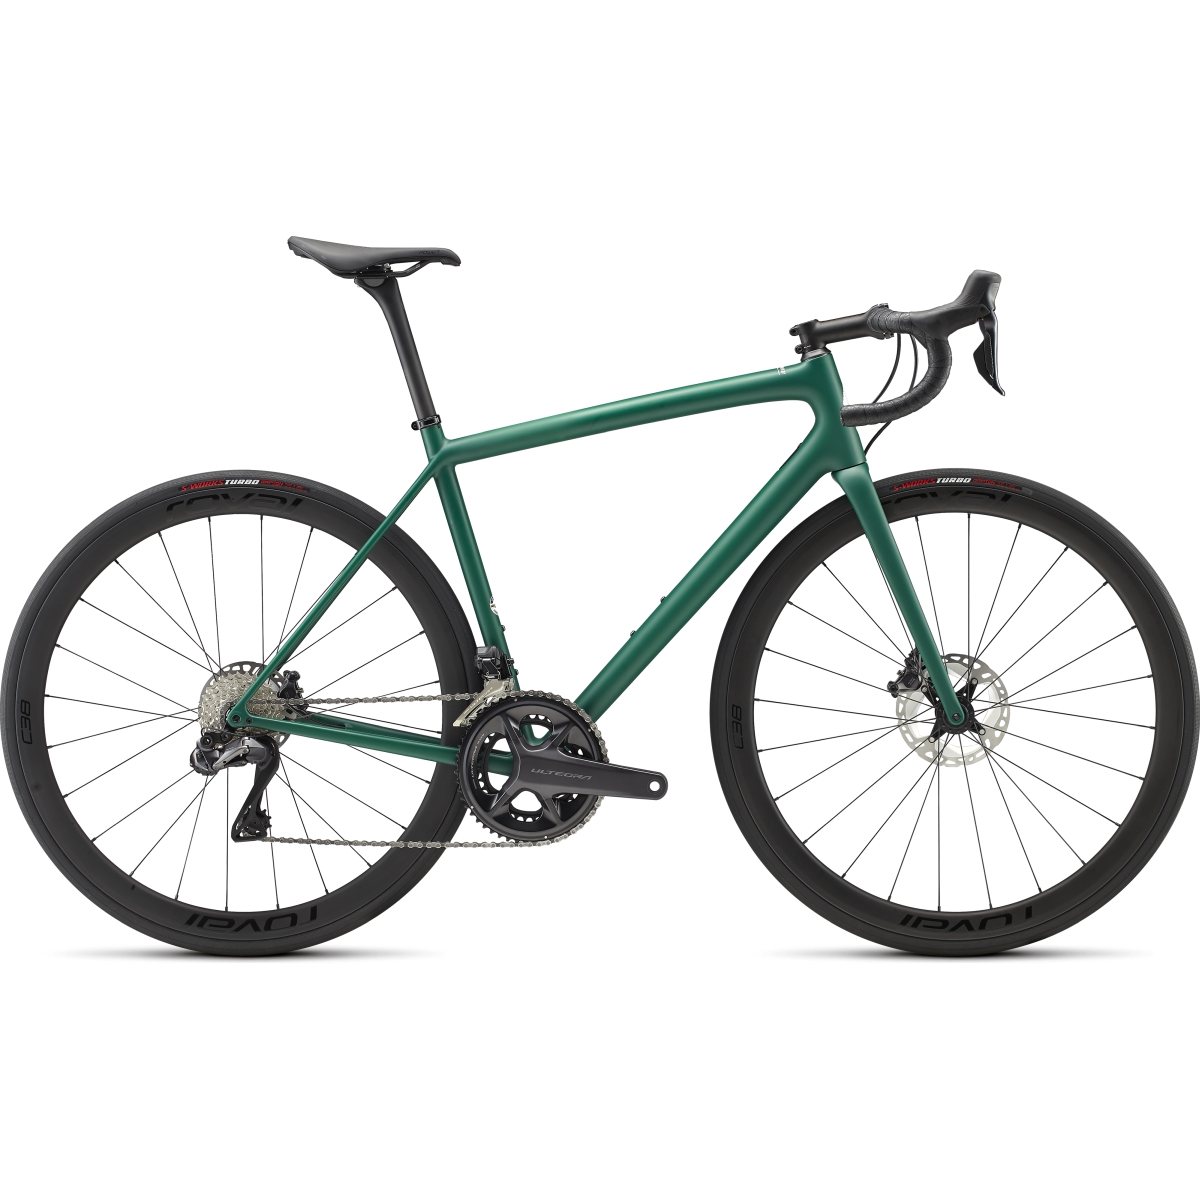 Productfoto van Specialized AETHOS EXPERT - Ultegra Di2 - Carbon Racefiets - pine green / white